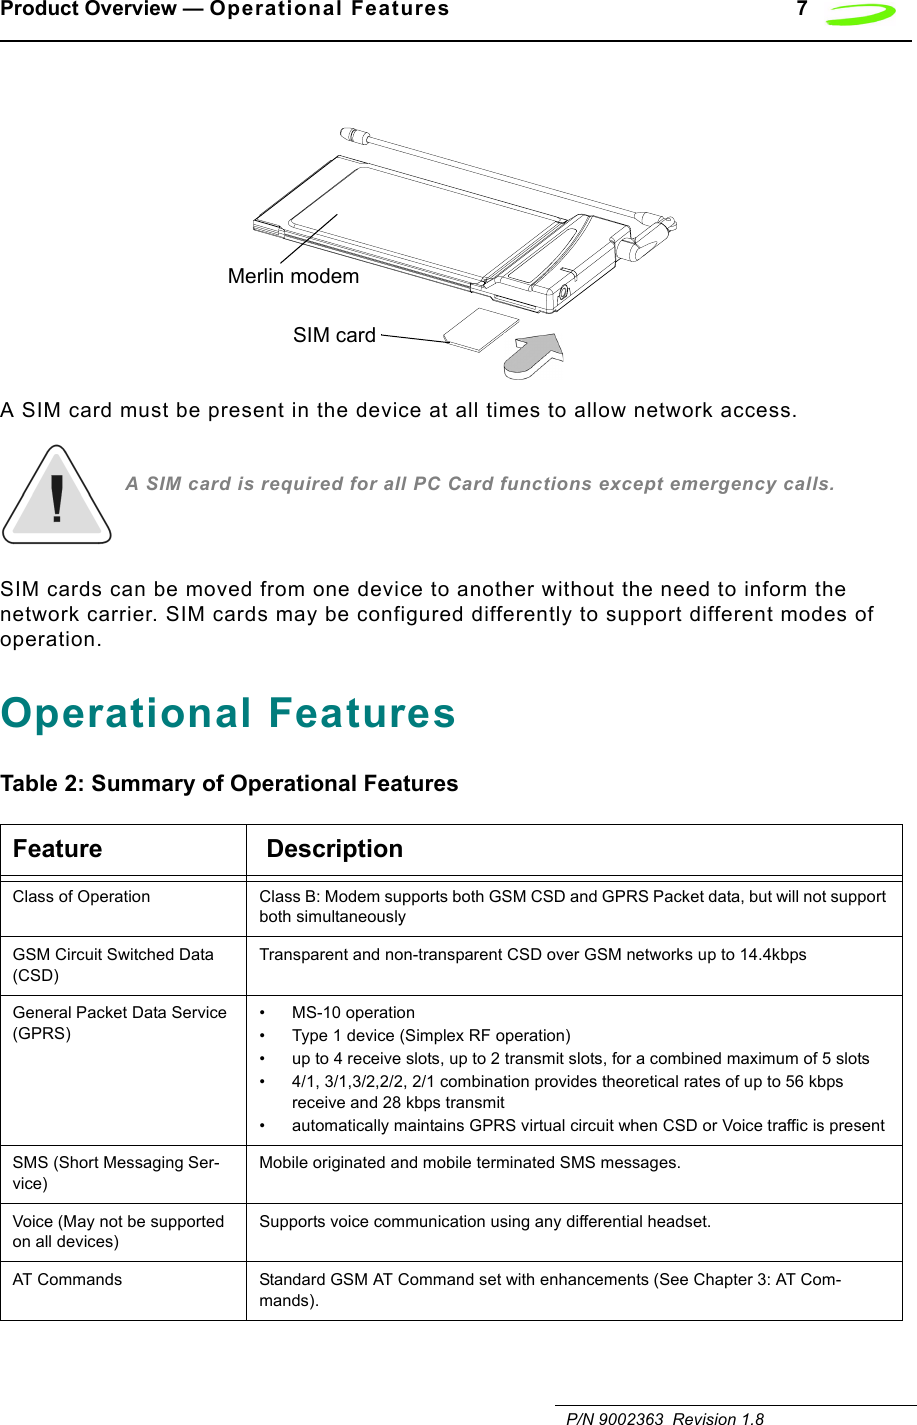 Product Overview — Operational Features 7   P/N 9002363  Revision 1.8A SIM card must be present in the device at all times to allow network access.A SIM card is required for all PC Card functions except emergency calls.SIM cards can be moved from one device to another without the need to inform the network carrier. SIM cards may be configured differently to support different modes of operation.Operational FeaturesTable 2: Summary of Operational FeaturesFeature  DescriptionClass of Operation Class B: Modem supports both GSM CSD and GPRS Packet data, but will not support both simultaneouslyGSM Circuit Switched Data (CSD)Transparent and non-transparent CSD over GSM networks up to 14.4kbpsGeneral Packet Data Service (GPRS)• MS-10 operation• Type 1 device (Simplex RF operation)• up to 4 receive slots, up to 2 transmit slots, for a combined maximum of 5 slots • 4/1, 3/1,3/2,2/2, 2/1 combination provides theoretical rates of up to 56 kbps receive and 28 kbps transmit• automatically maintains GPRS virtual circuit when CSD or Voice traffic is presentSMS (Short Messaging Ser-vice)Mobile originated and mobile terminated SMS messages.Voice (May not be supported on all devices)Supports voice communication using any differential headset.AT Commands Standard GSM AT Command set with enhancements (See Chapter 3: AT Com-mands).SIM cardMerlin modem